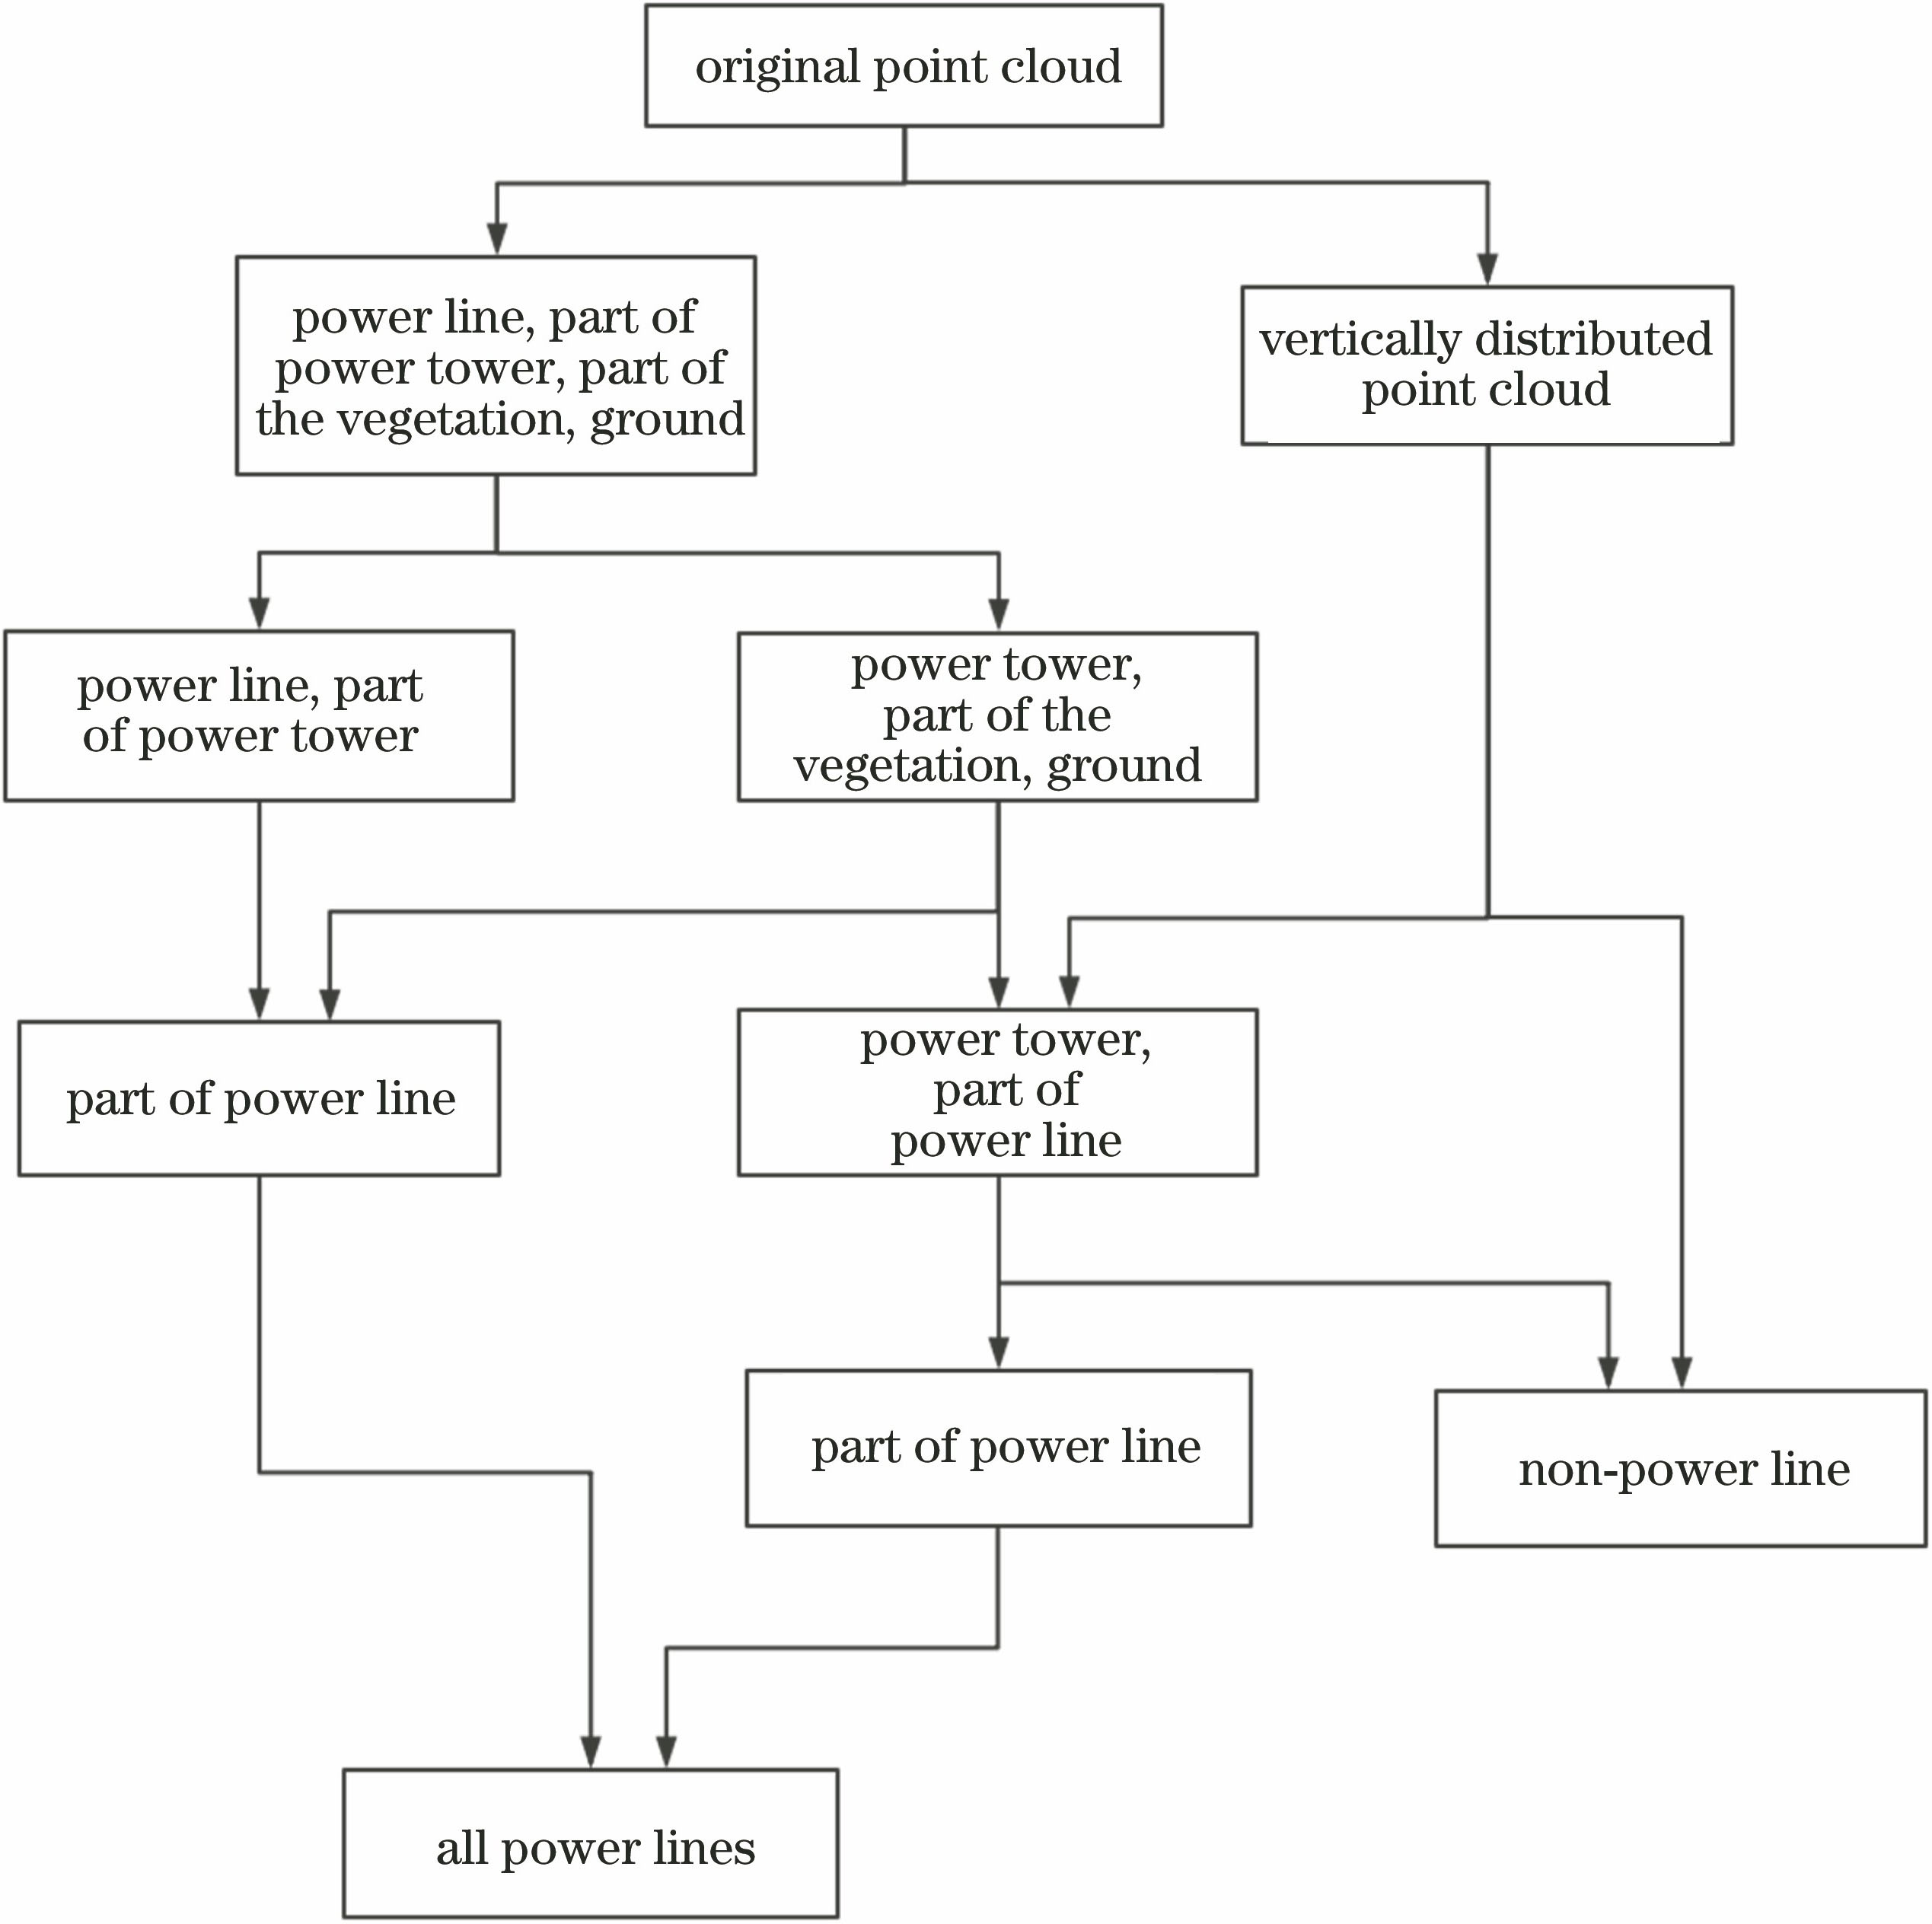 Flow chart of power line extraction based on LiDAR piont cloud data